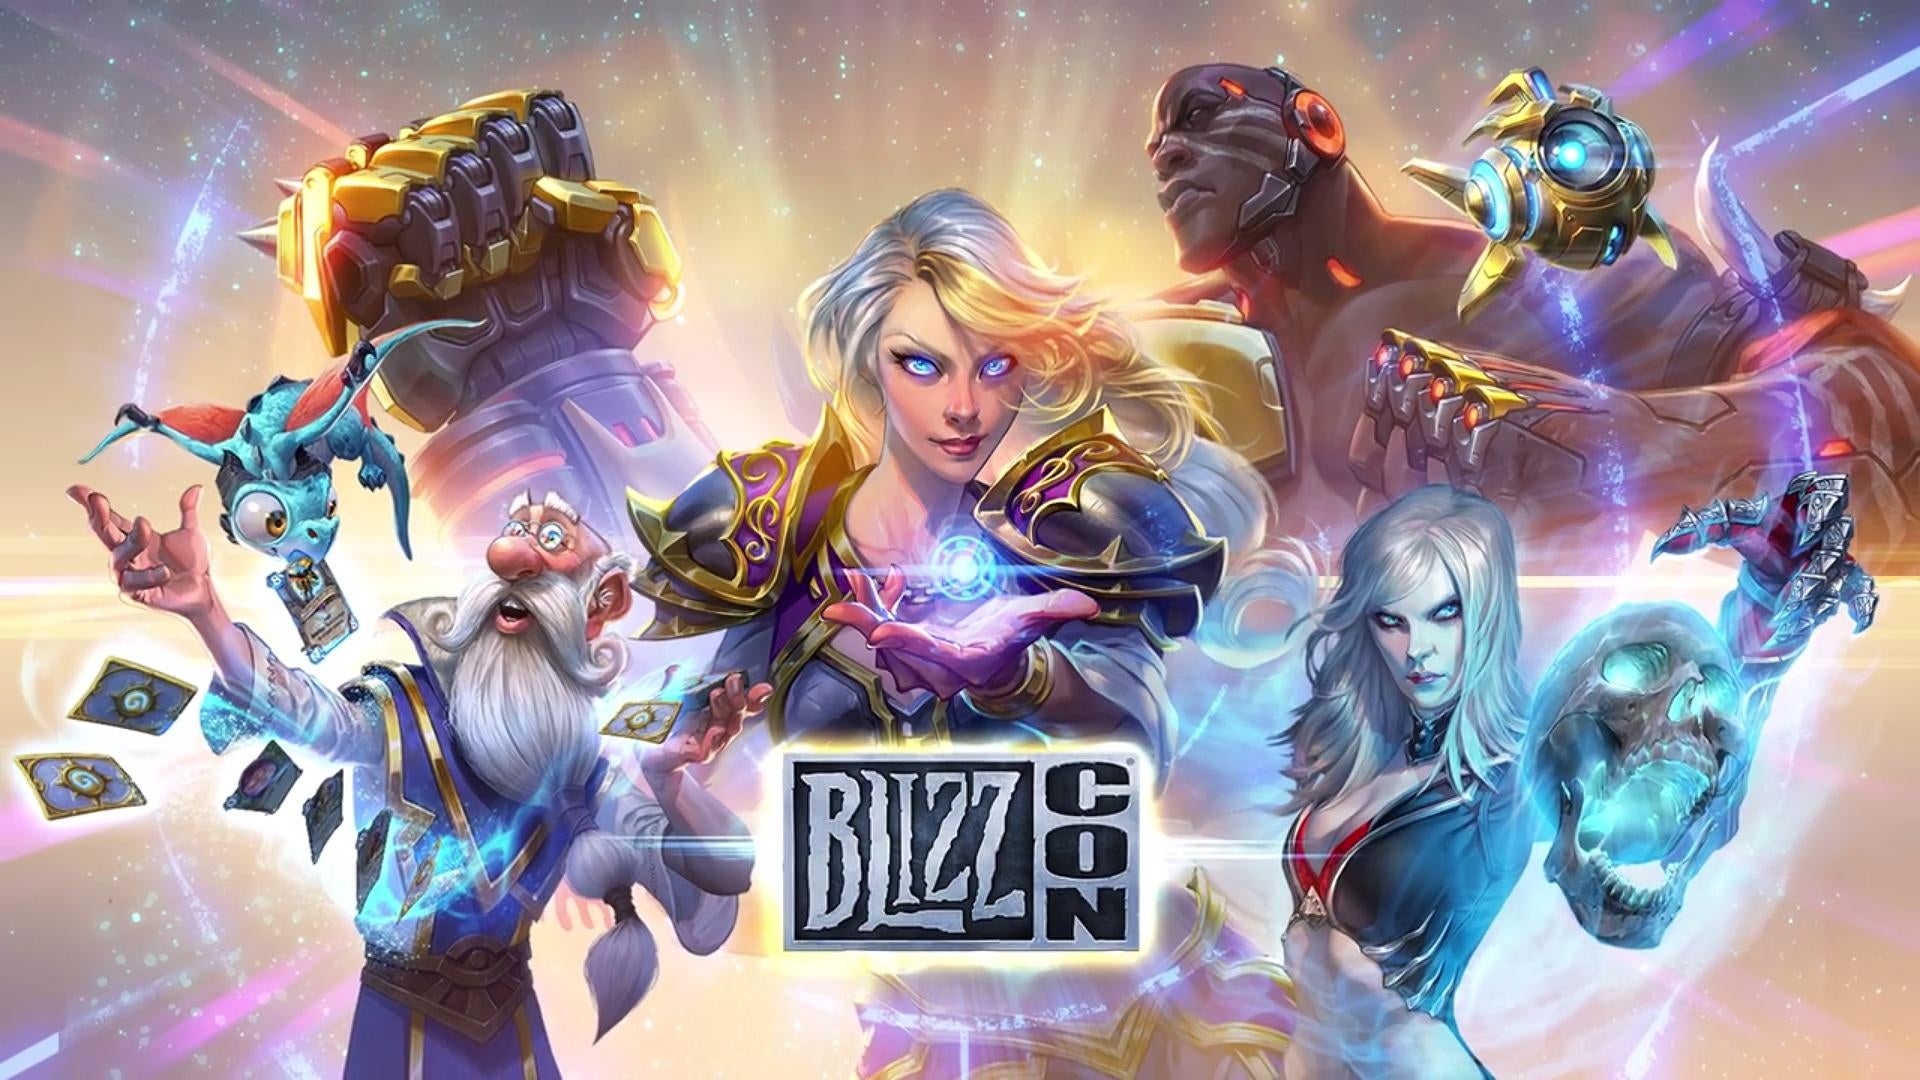 Image for BlizzCon 2017 kicks off today - watch the opening ceremony here